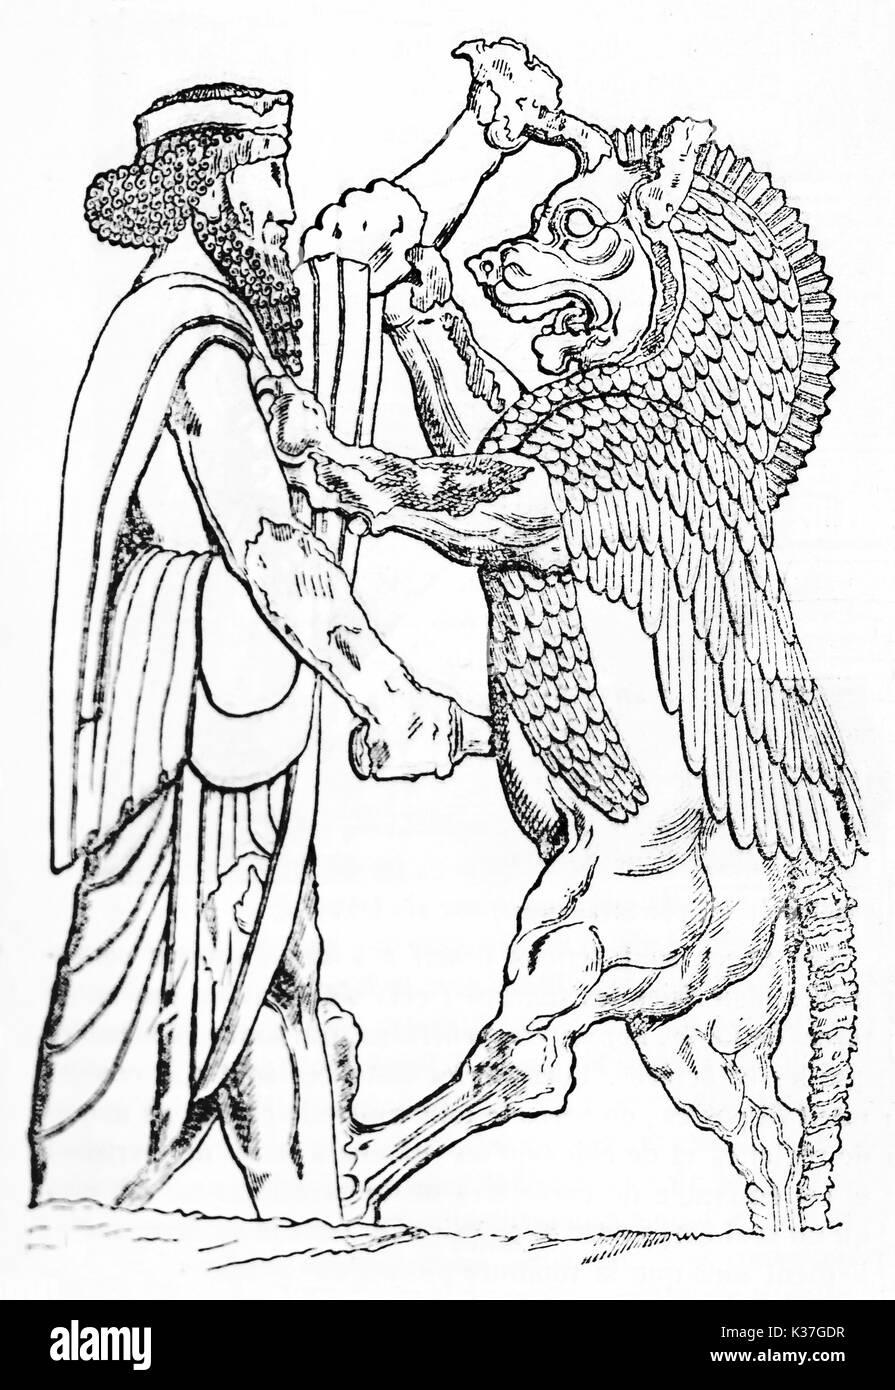 Ancient king fighting with a monster, both fighters displayed in profile view. Persepolis bas relief. Old Illustration by Muret, published on Magasin Pittoresque, Paris, 1834 Stock Photo